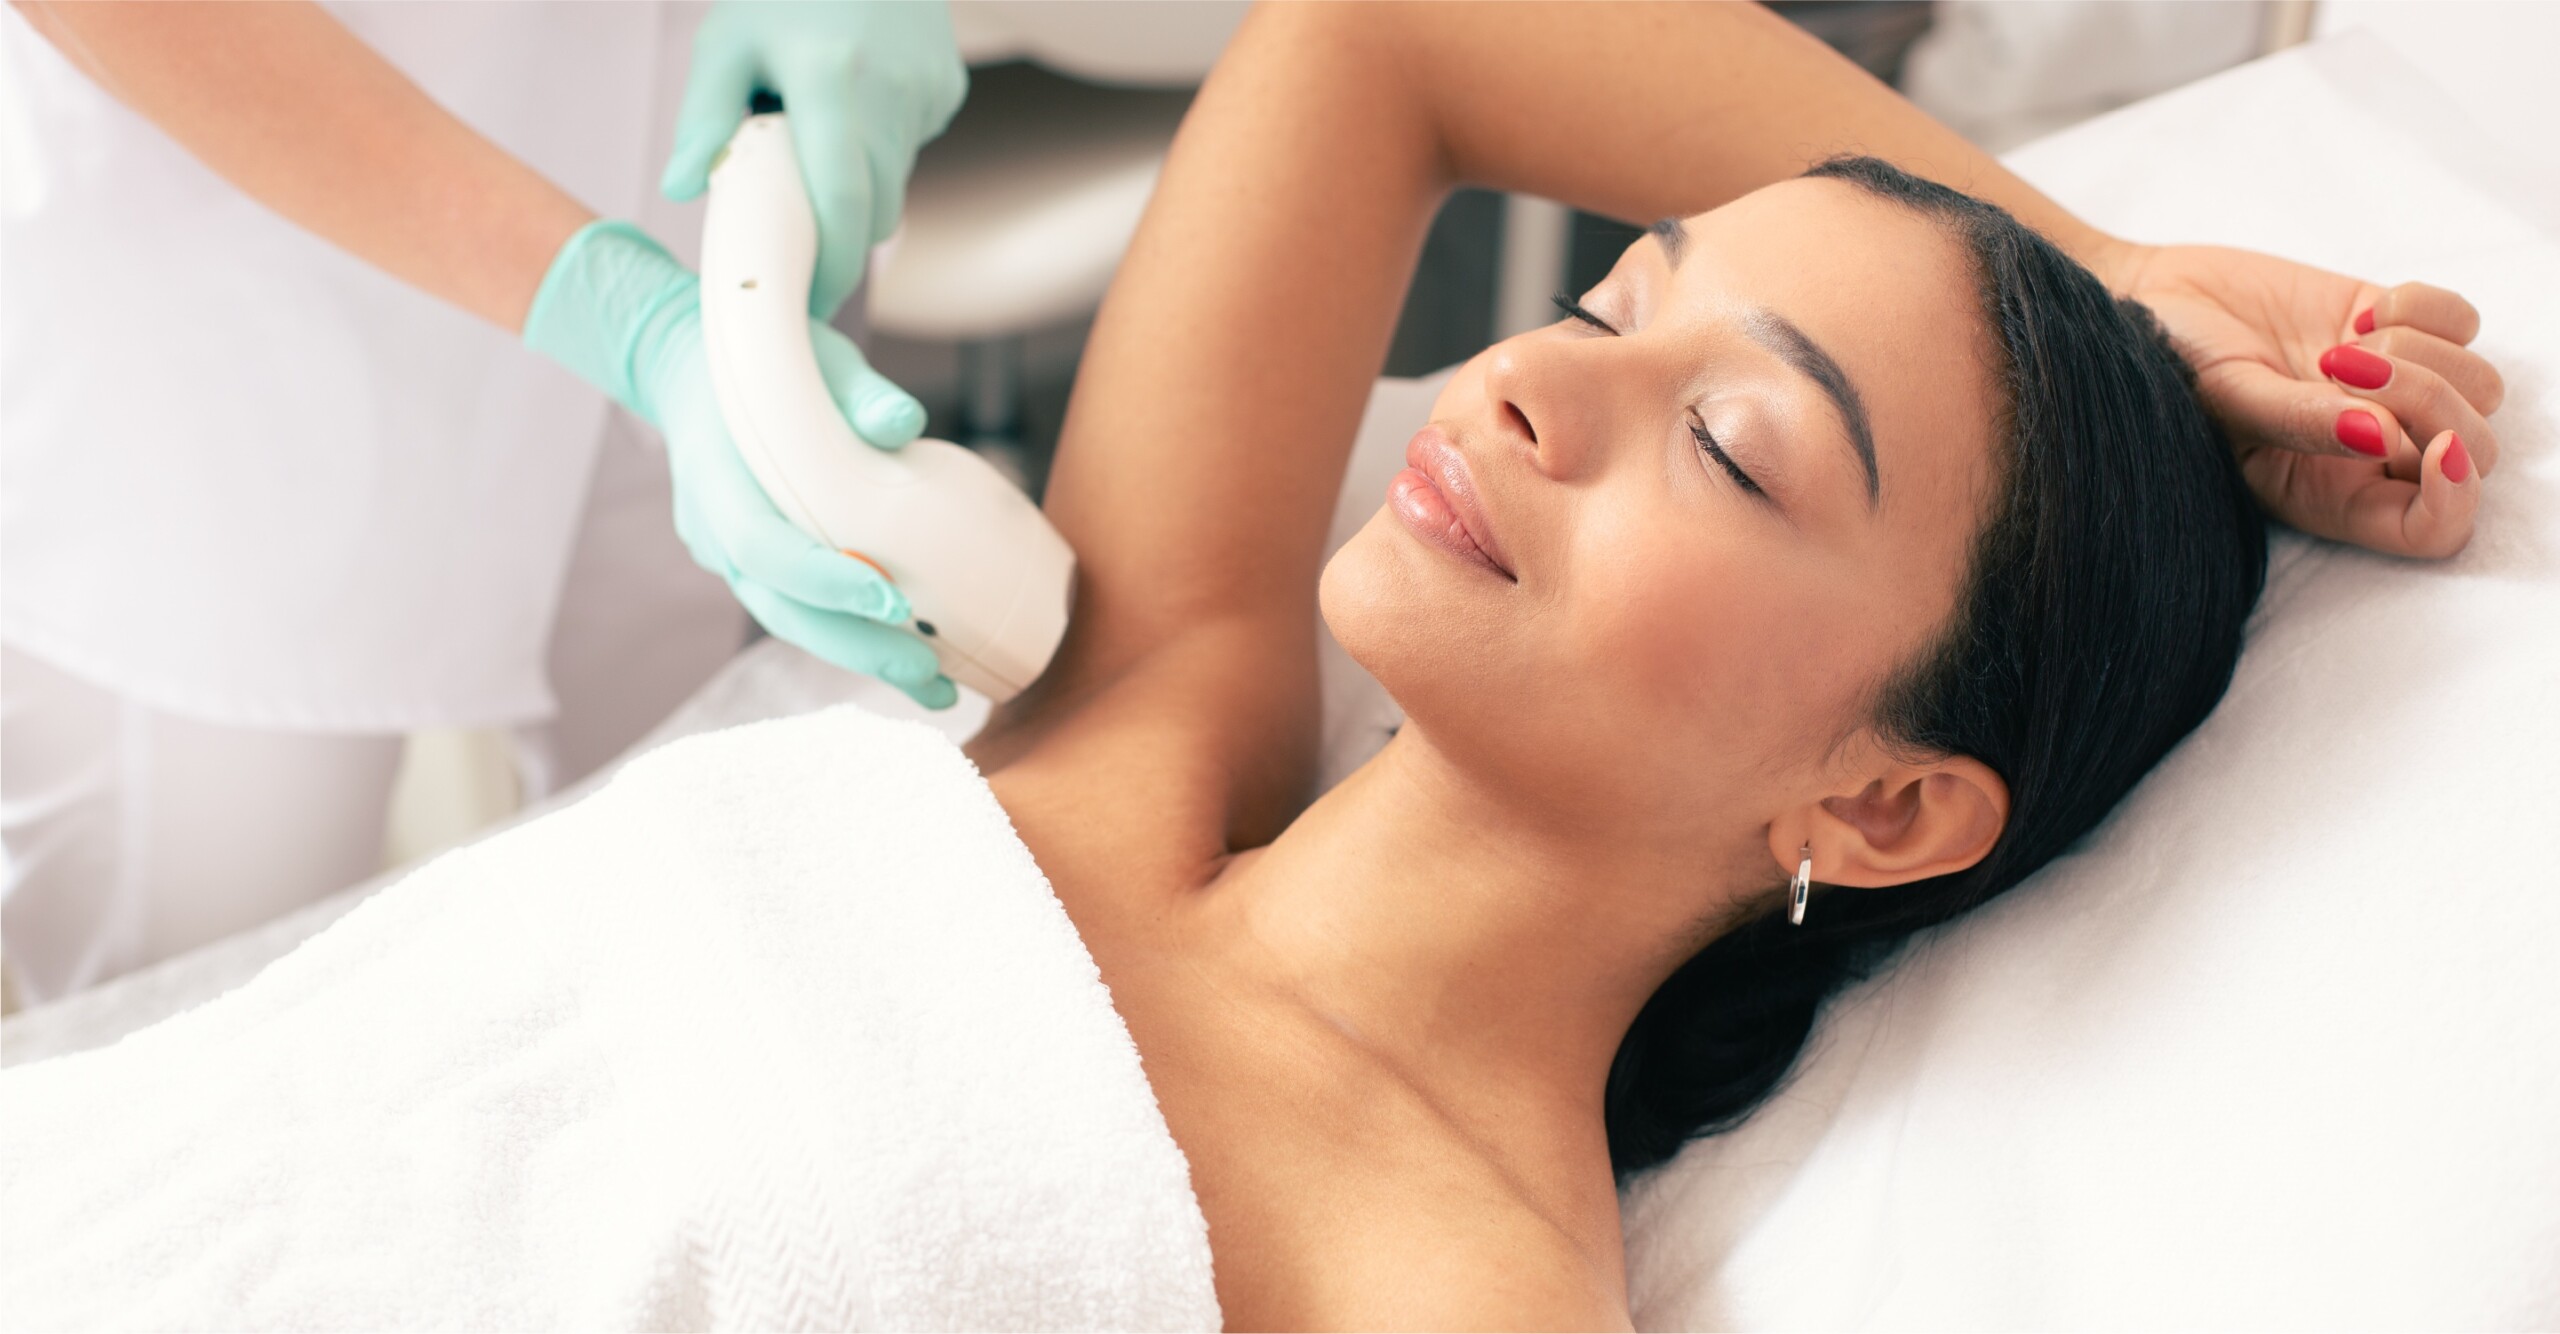 Woman is getting permanent laser hair removal on her underarms.